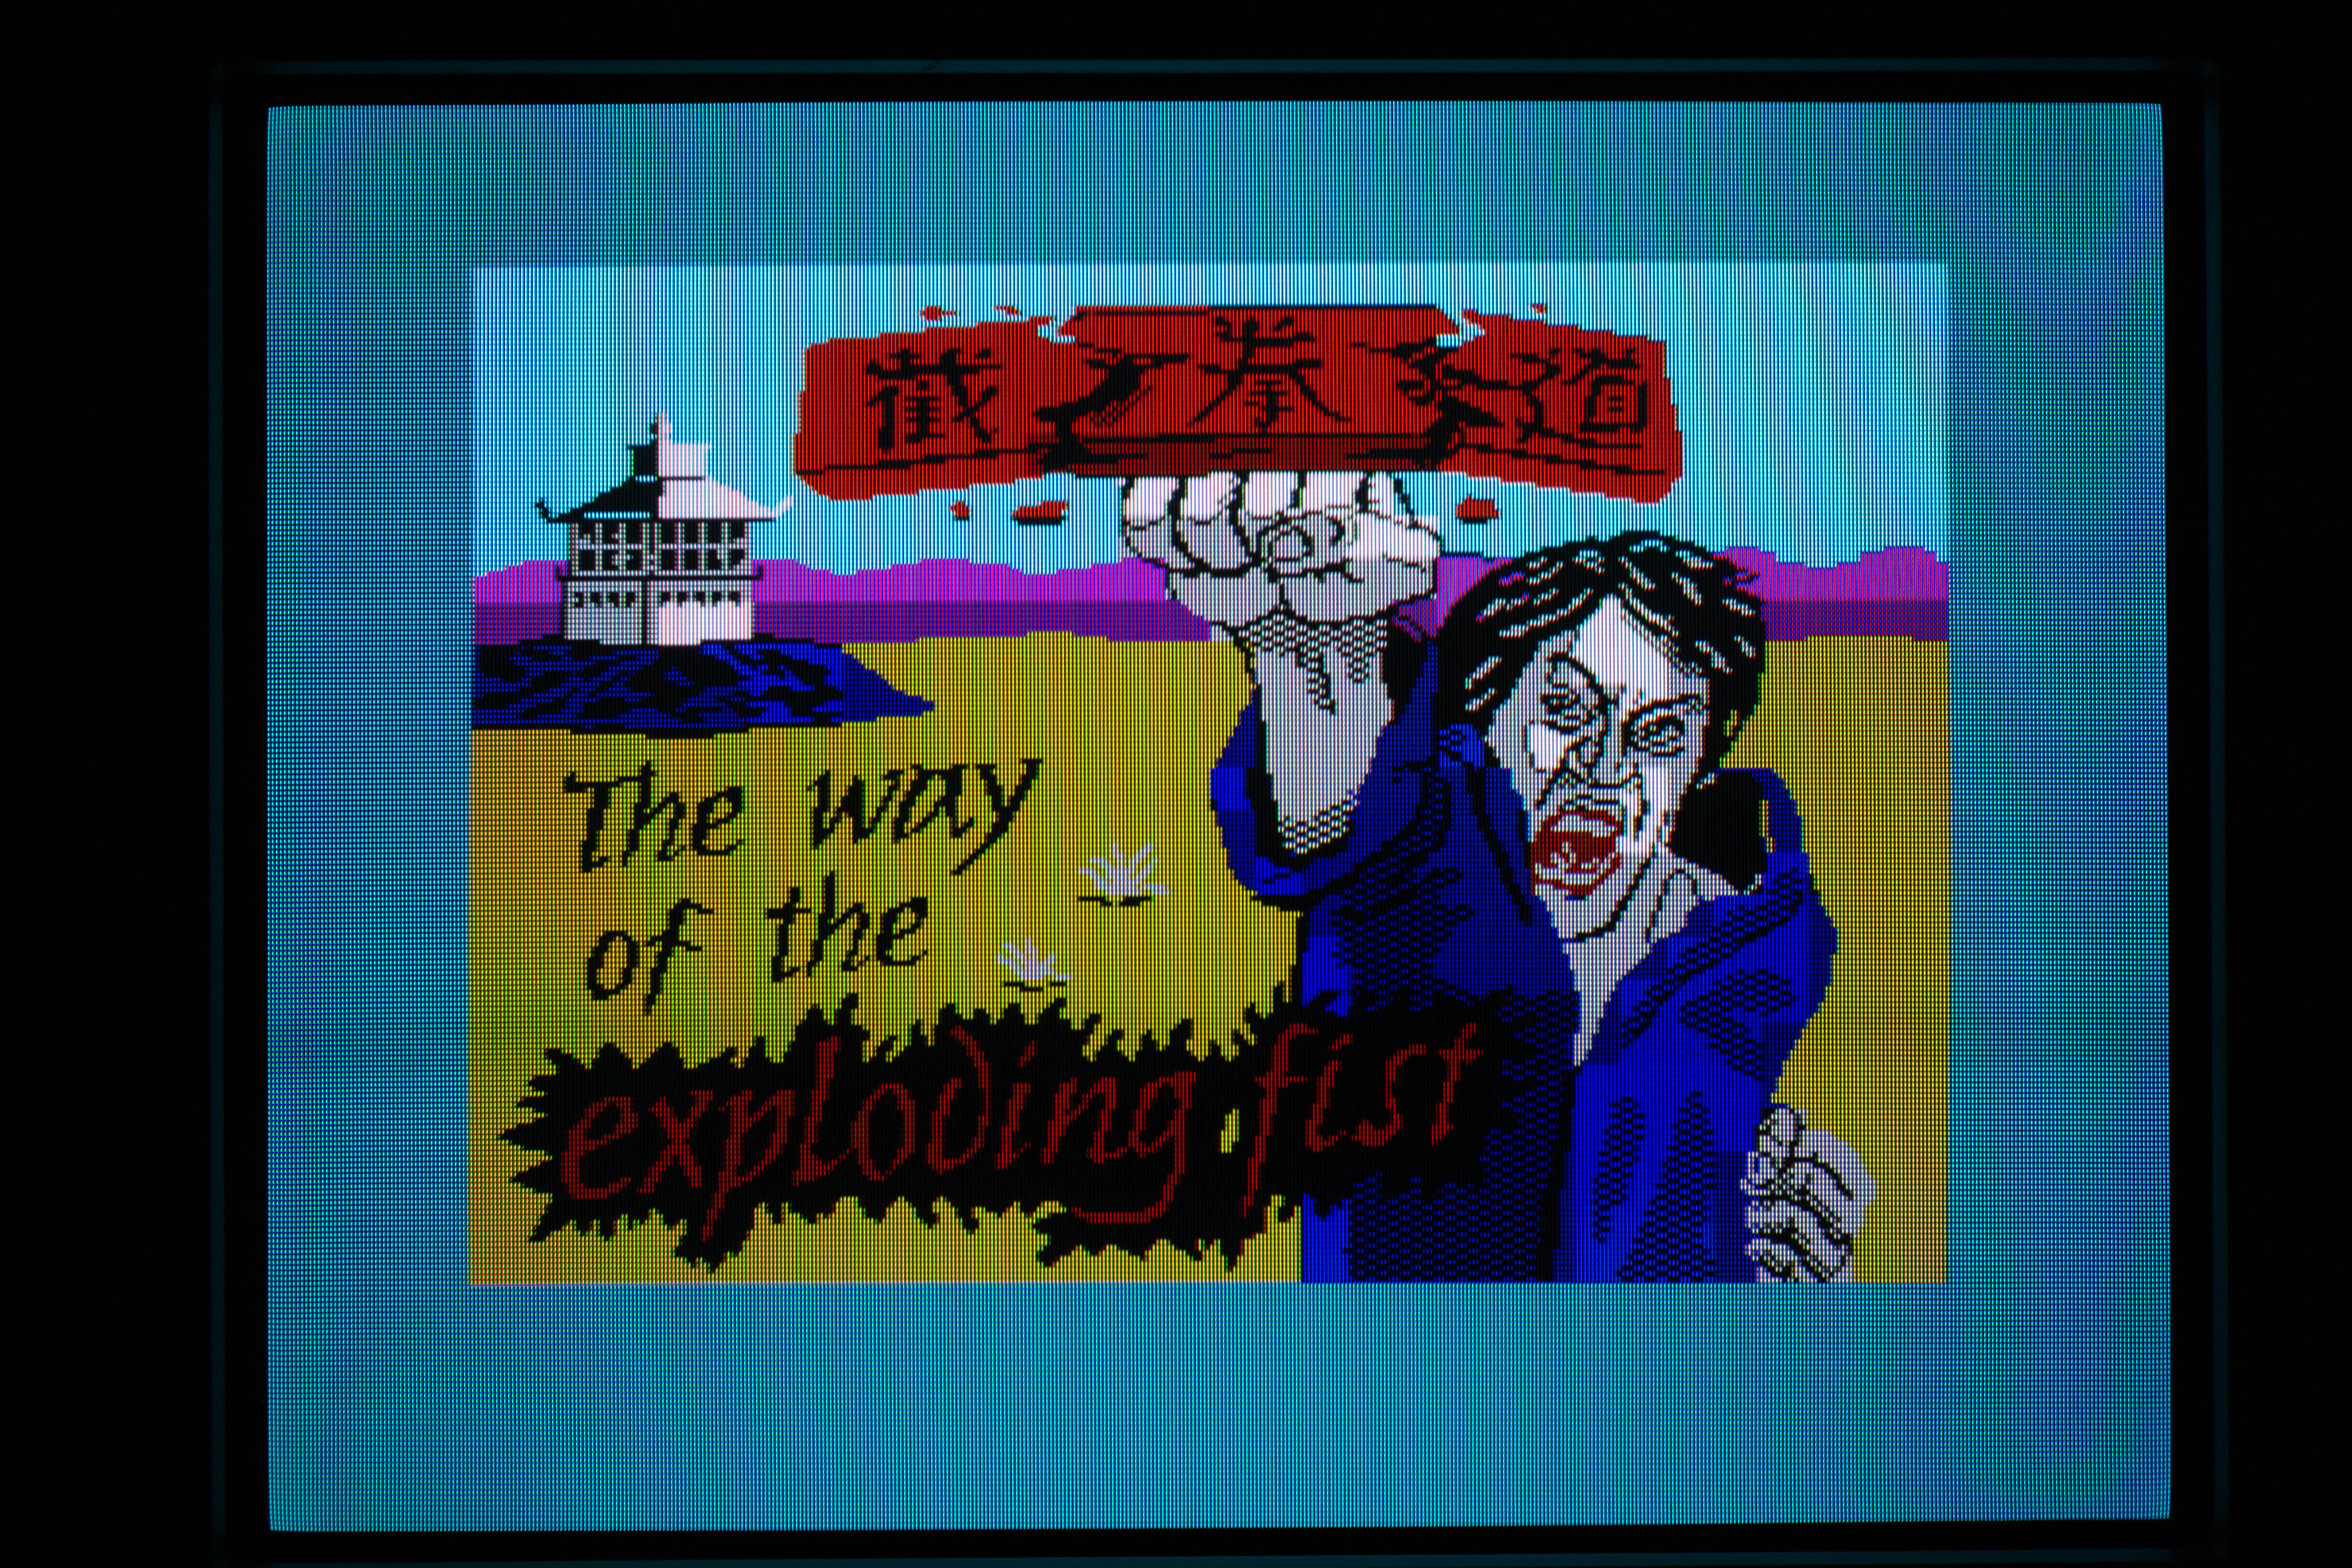 The-Way-Of-The-Exploding-Fist-ZX-Spectrum-48-Kb-RGB-Spectra-PAL-Sony-KV21-FT1-K-1.jpg